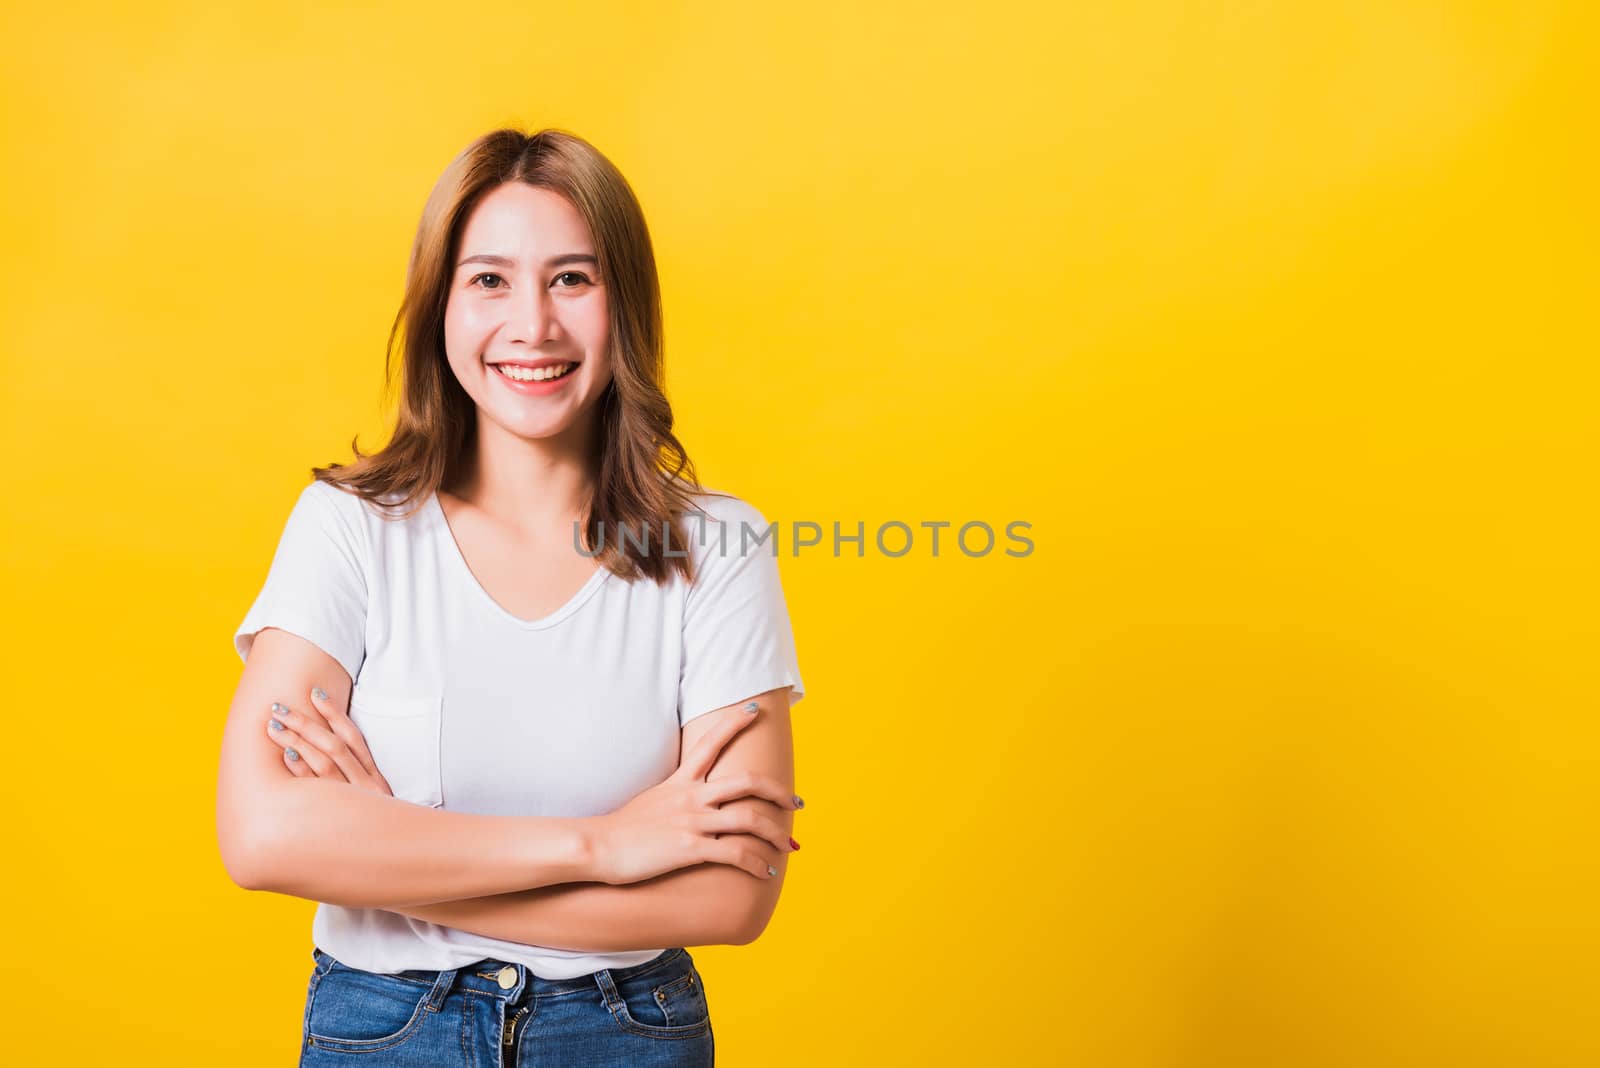 Asian Thai happy portrait beautiful cute young woman standing wear t-shirt her smile confidence with crossed arms looking to side up isolated, studio shot on yellow background and copy space